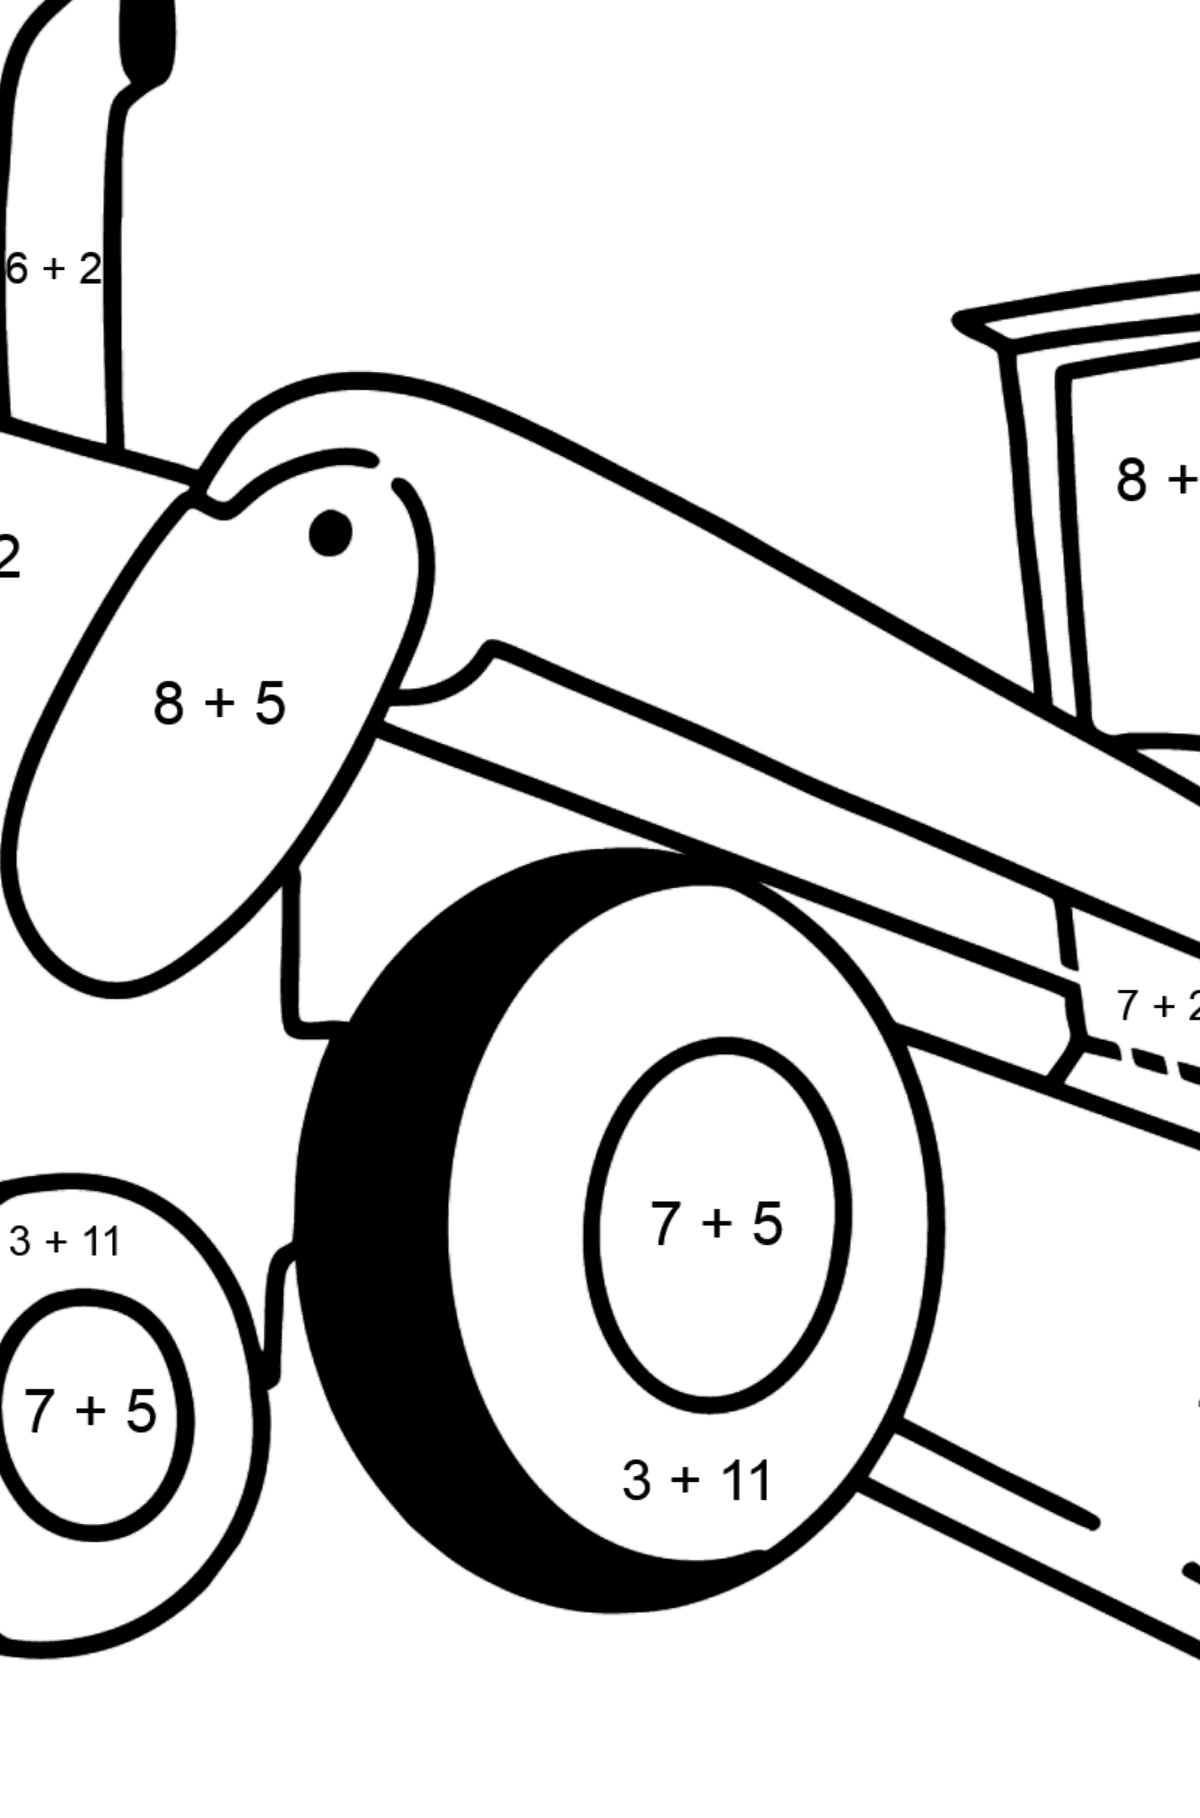 Tractor Grader coloring page - Math Coloring - Addition for Kids